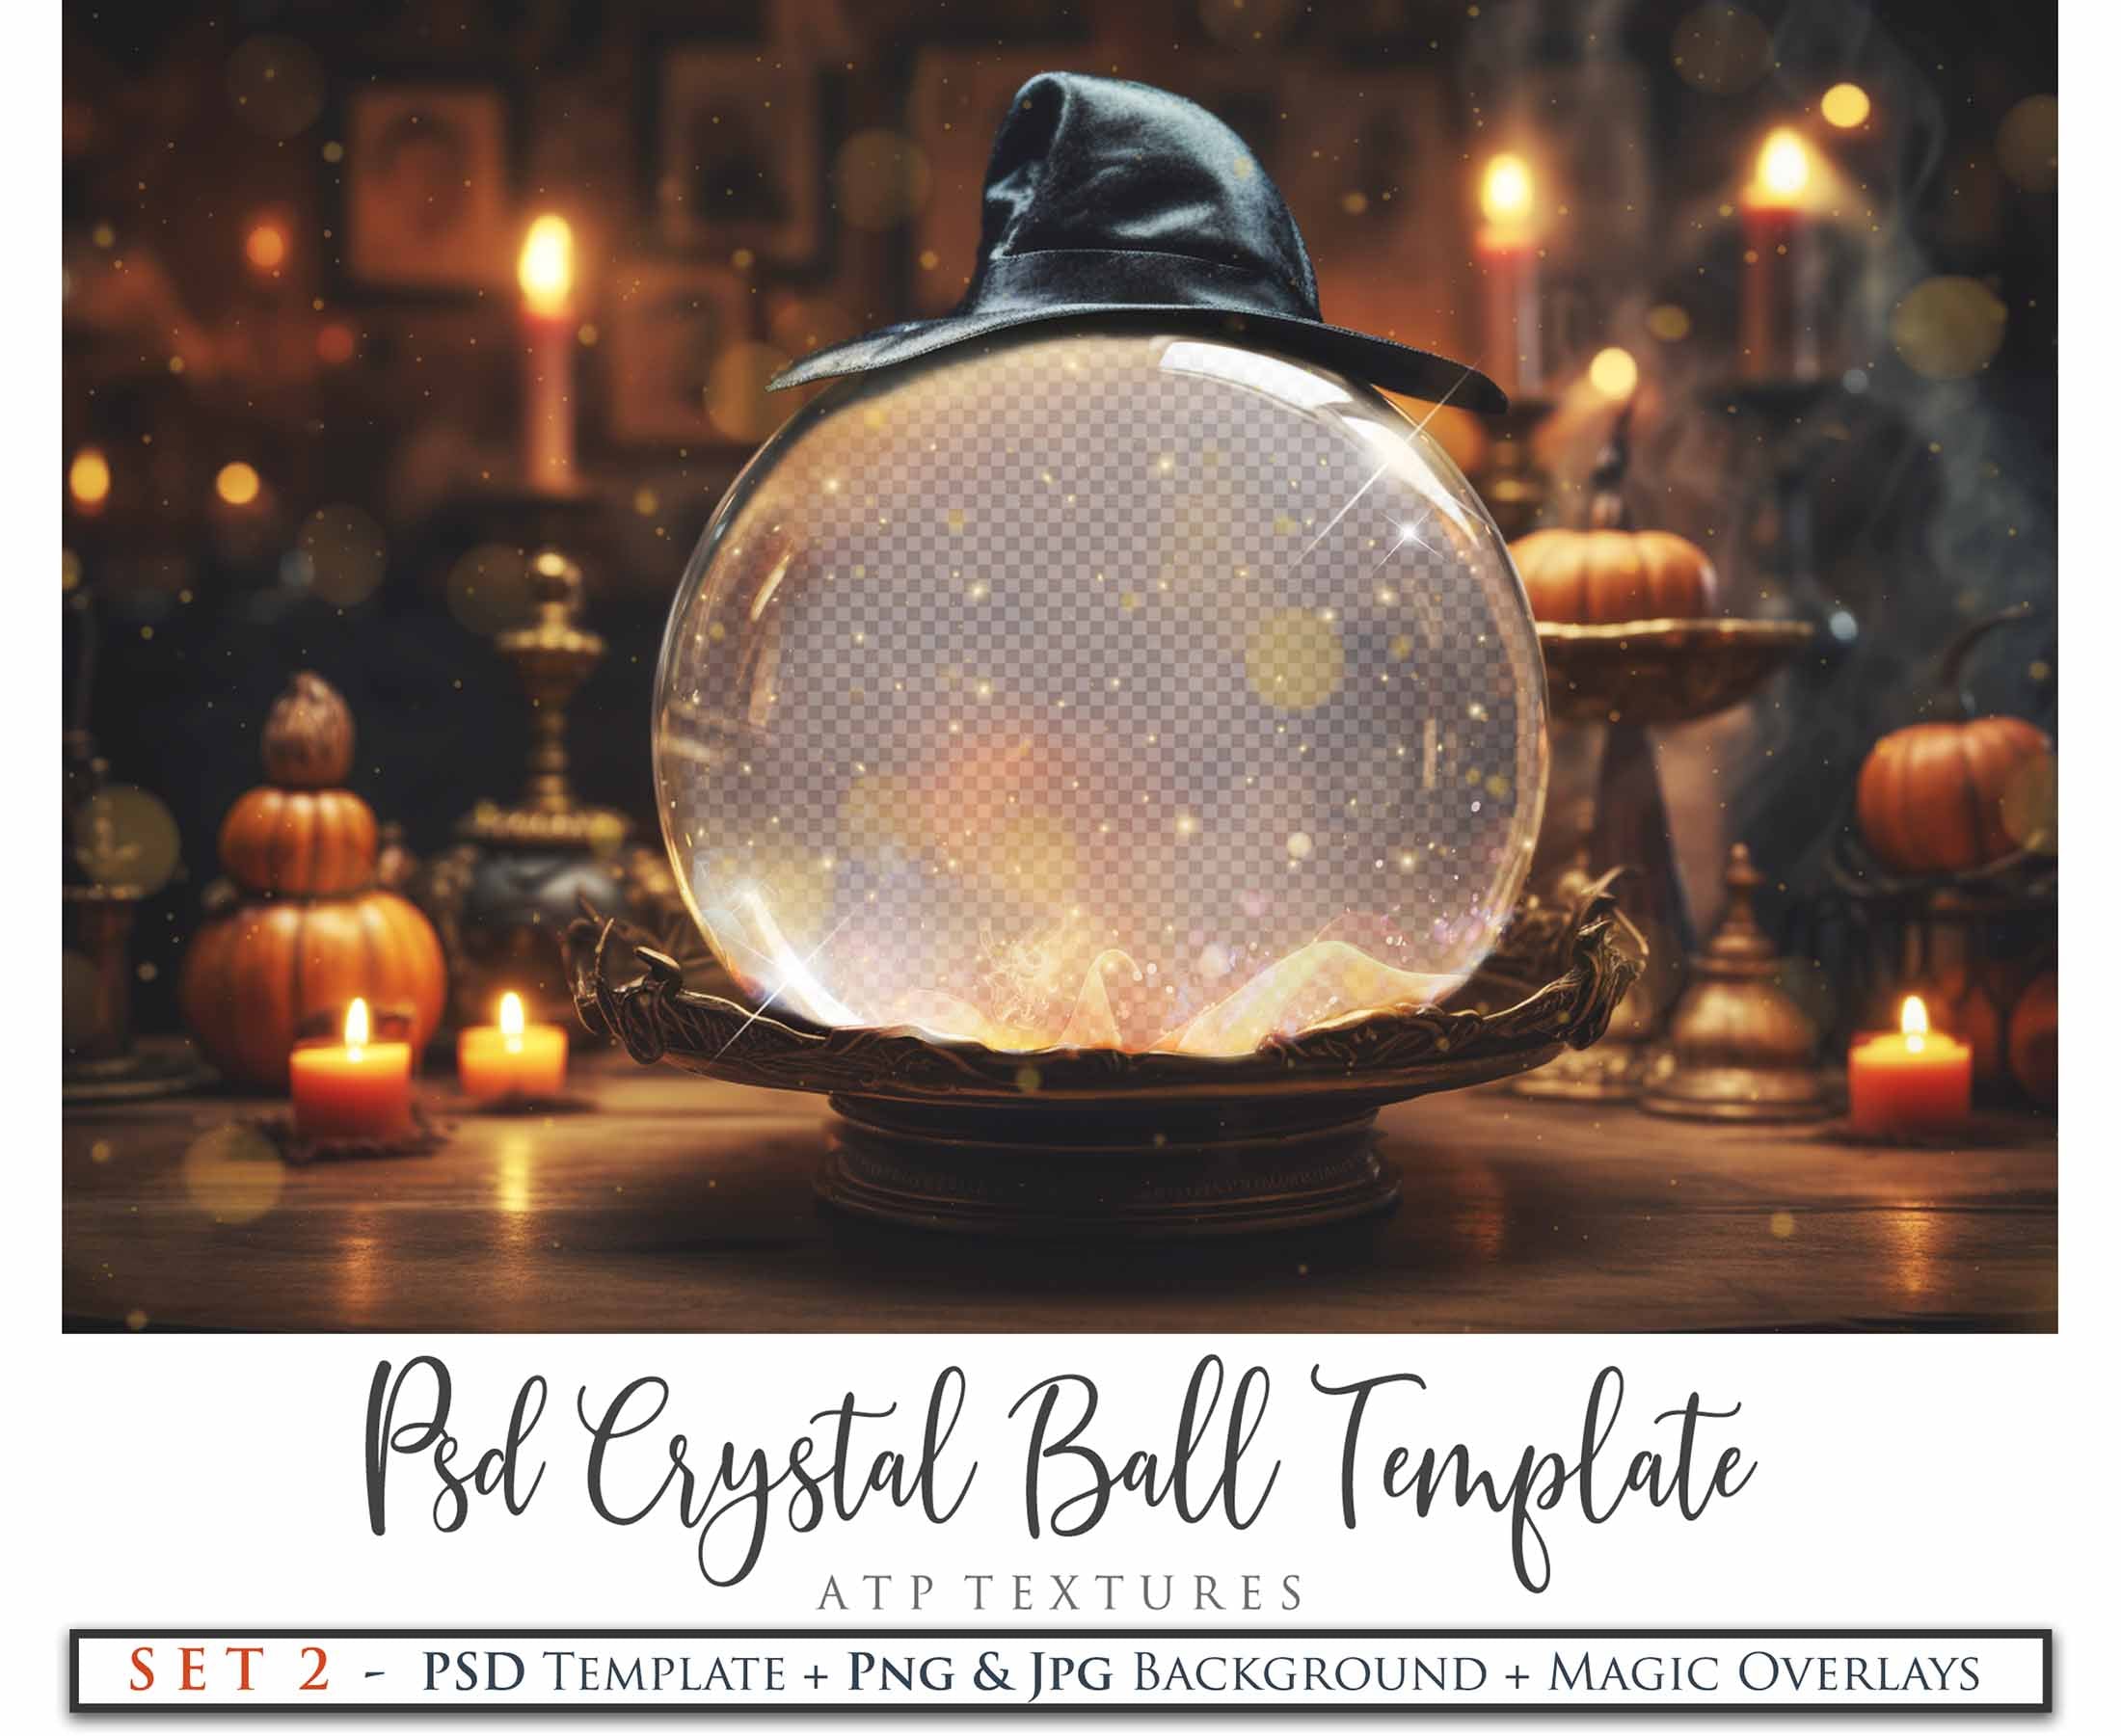 Magical Halloween Template Background. Snow globe with overlays. Add a photo to the digital background. Glass Effect Ornament bauble. Jpeg and Png copies. With magic overlays included. High resolution, quality files for photography, scrapbooking.